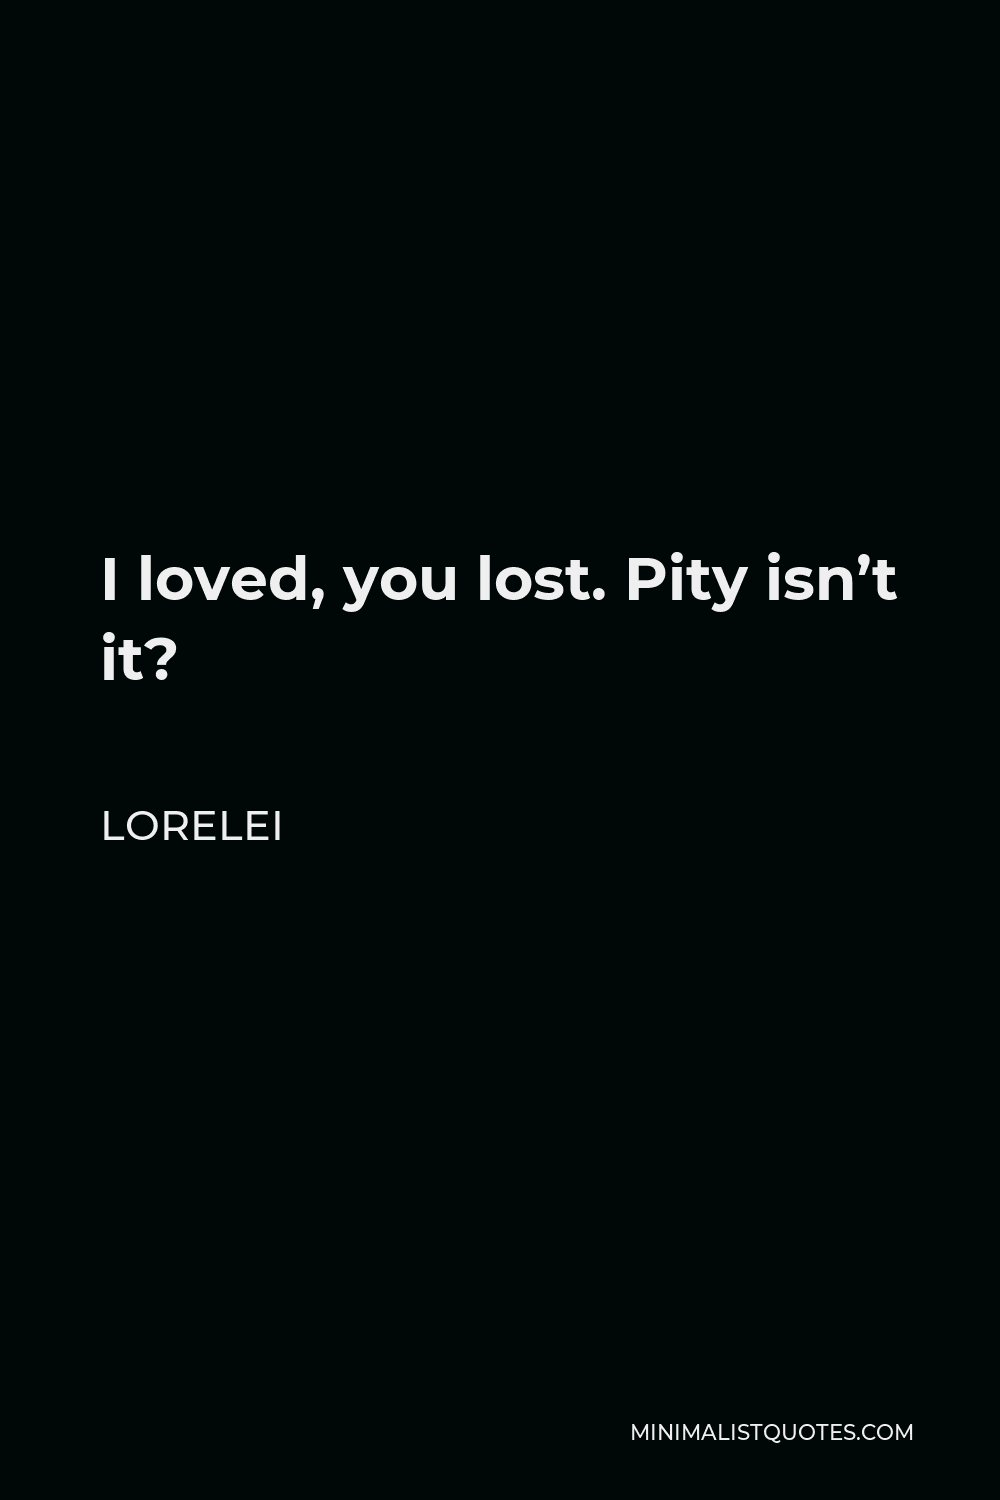 Lorelei Quote - I loved, you lost. Pity isn’t it?